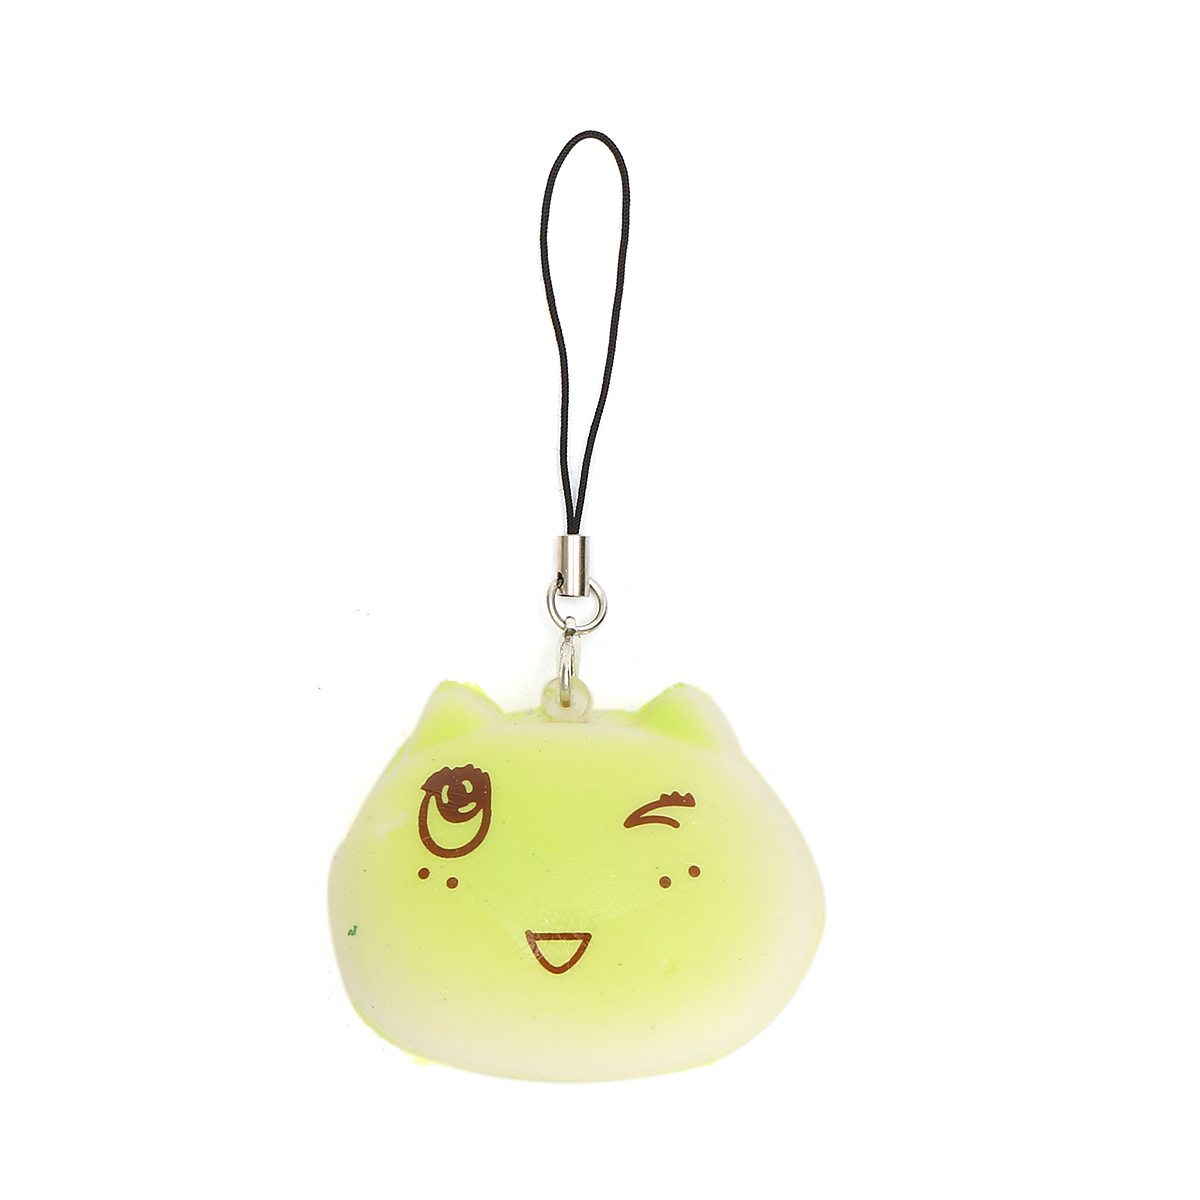 1PCS-Kawaii-Face-Simulate-Colorful-Cartoon-Totoro-Squishy-Toy-Stress-Reliever-Phone-Chain-1137334-9